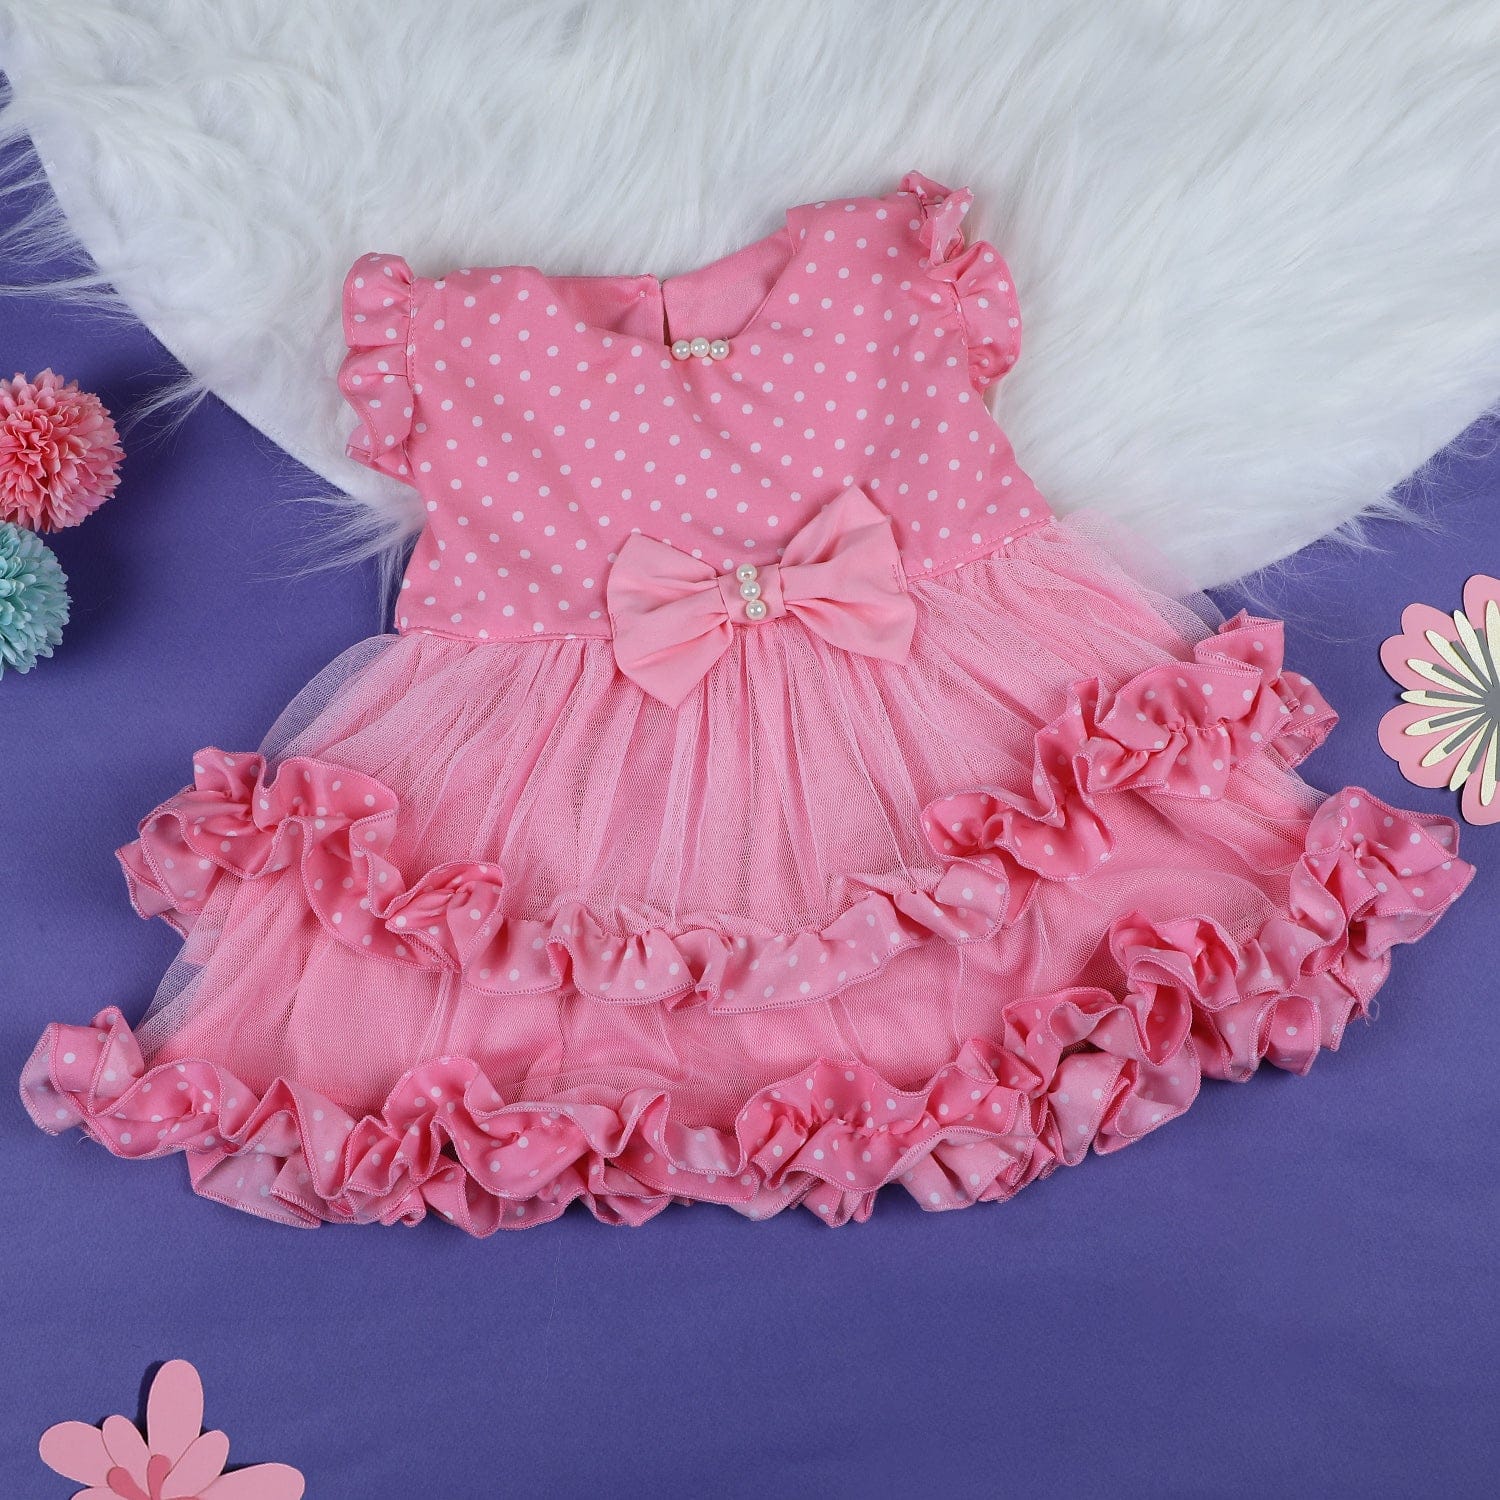 Baby Moo Polka Dot With Pearl And Bow Detail Frilly Layered Party Dress - Pink - Baby Moo